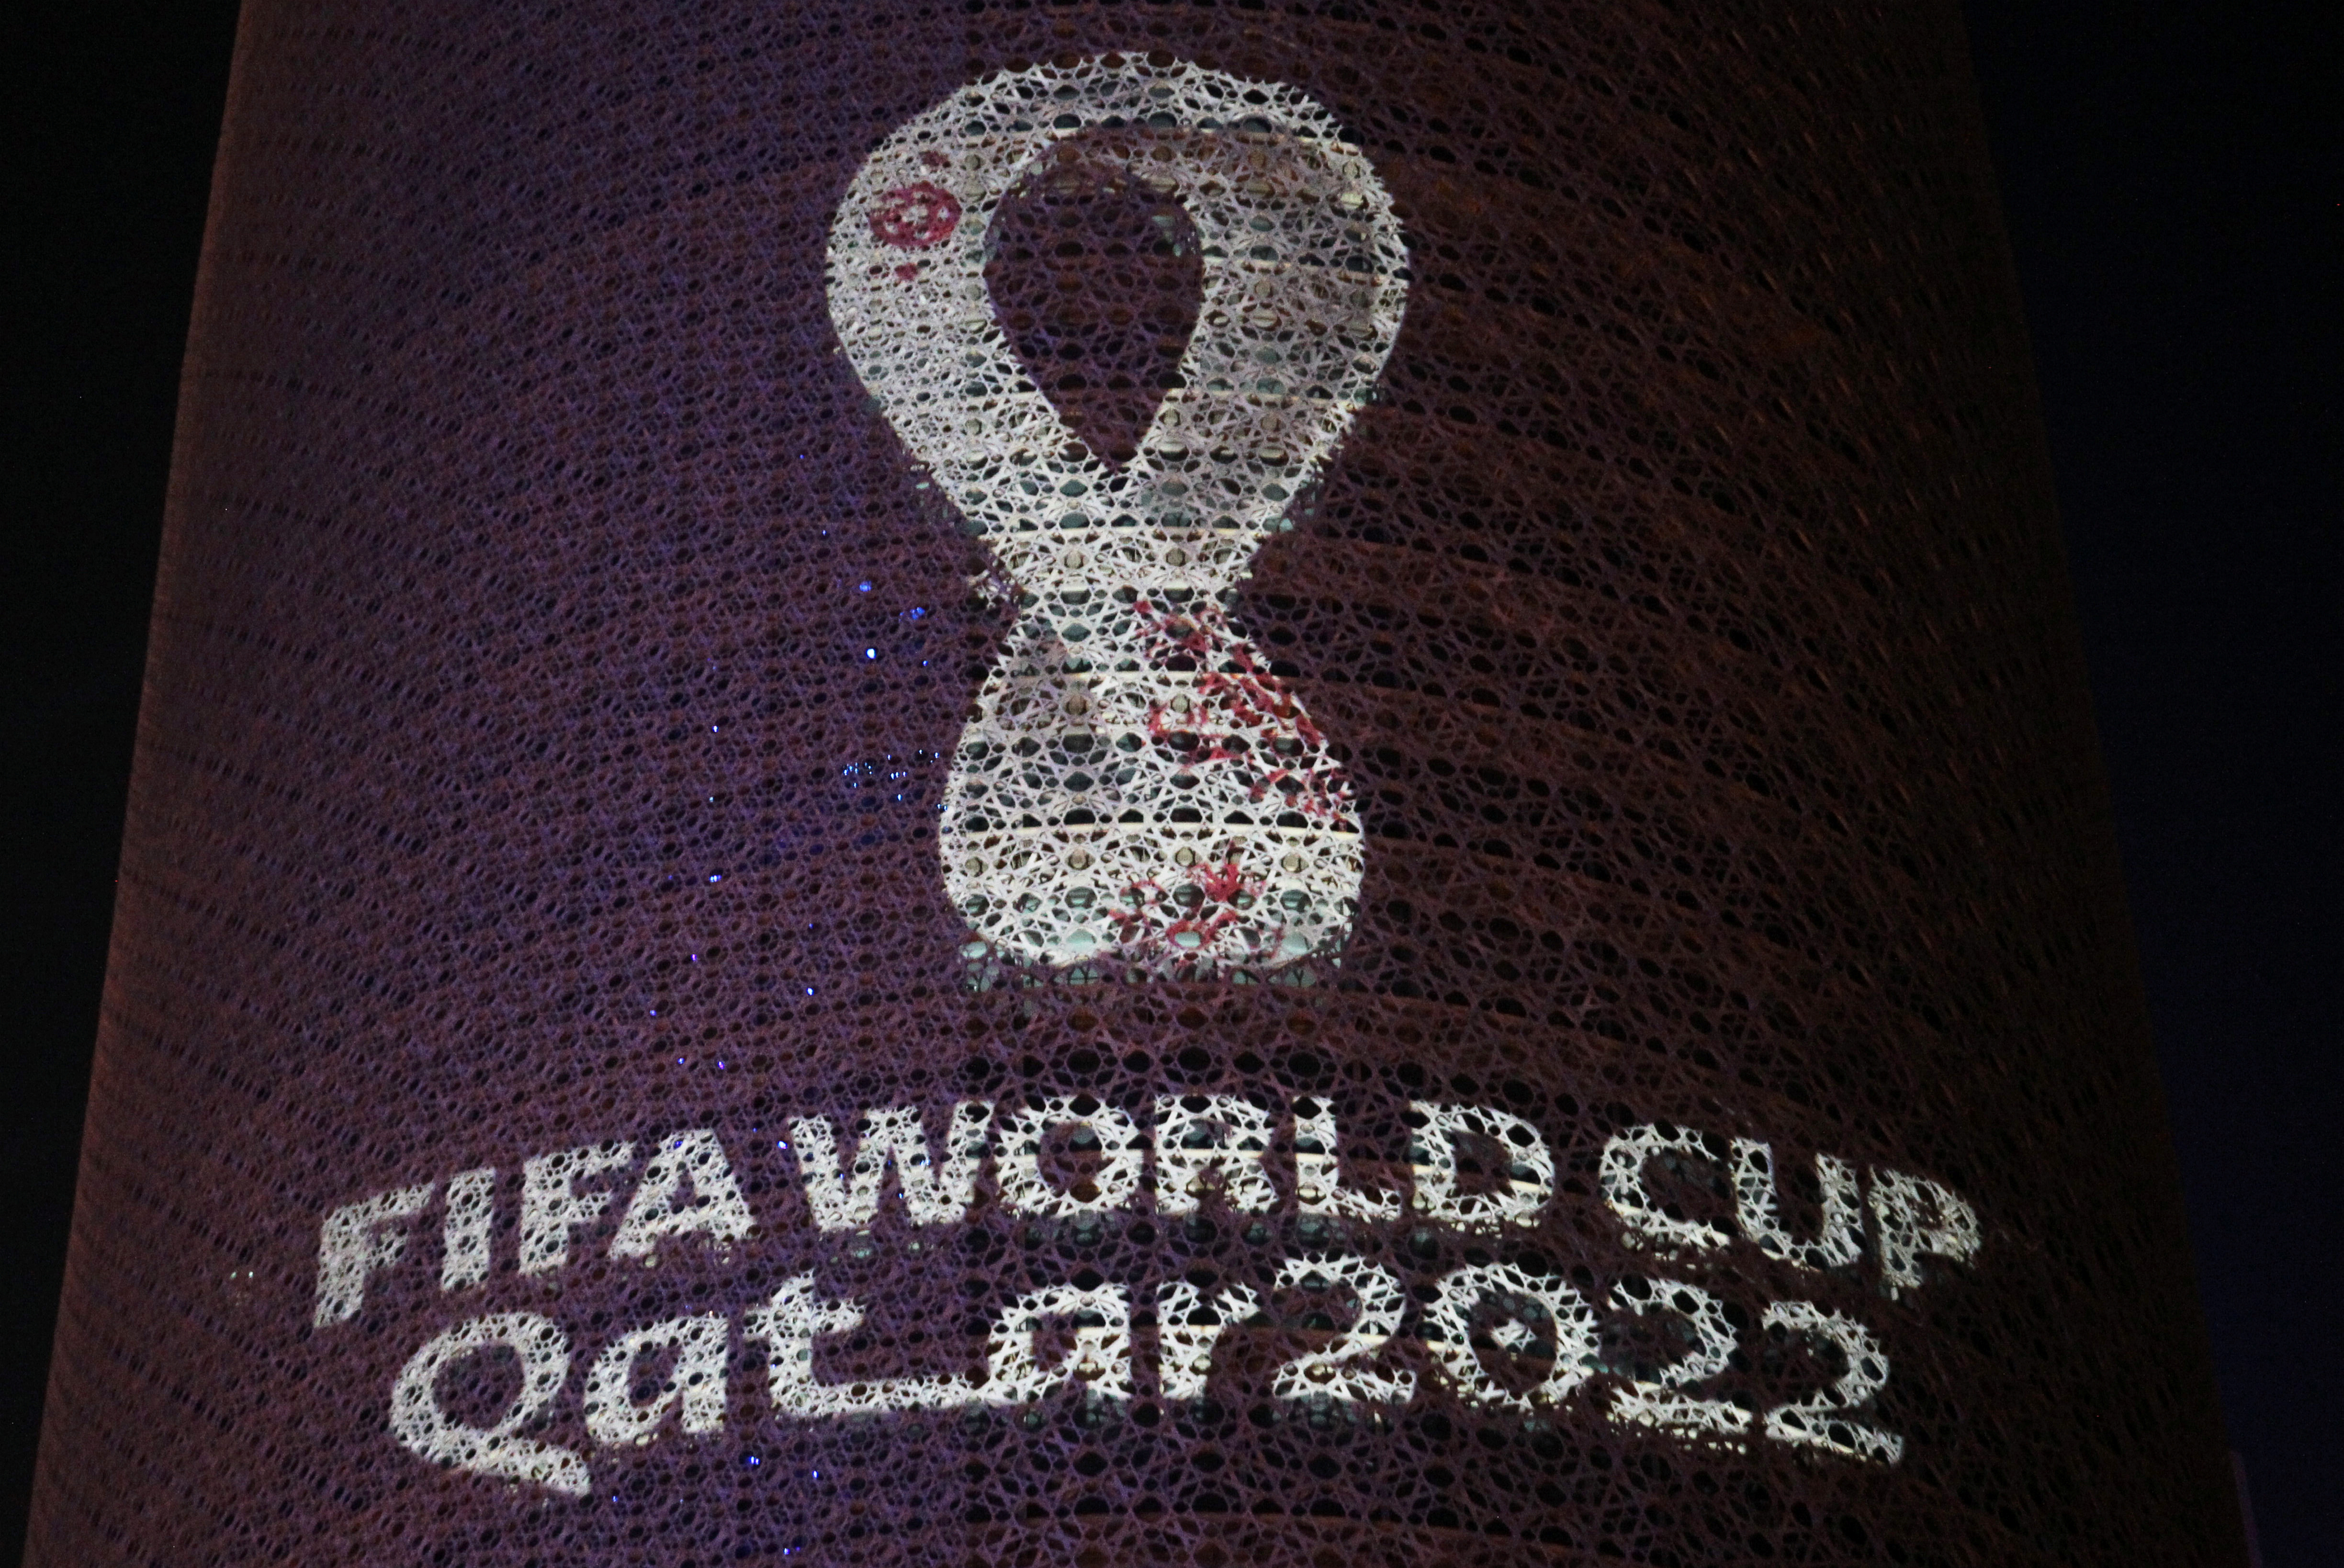 The tournament's official logo for the 2022 Qatar World Cup is seen on the Doha Tower, in Doha, Qatar, September 3, 2019. REUTERS/Naseem Zeitoun